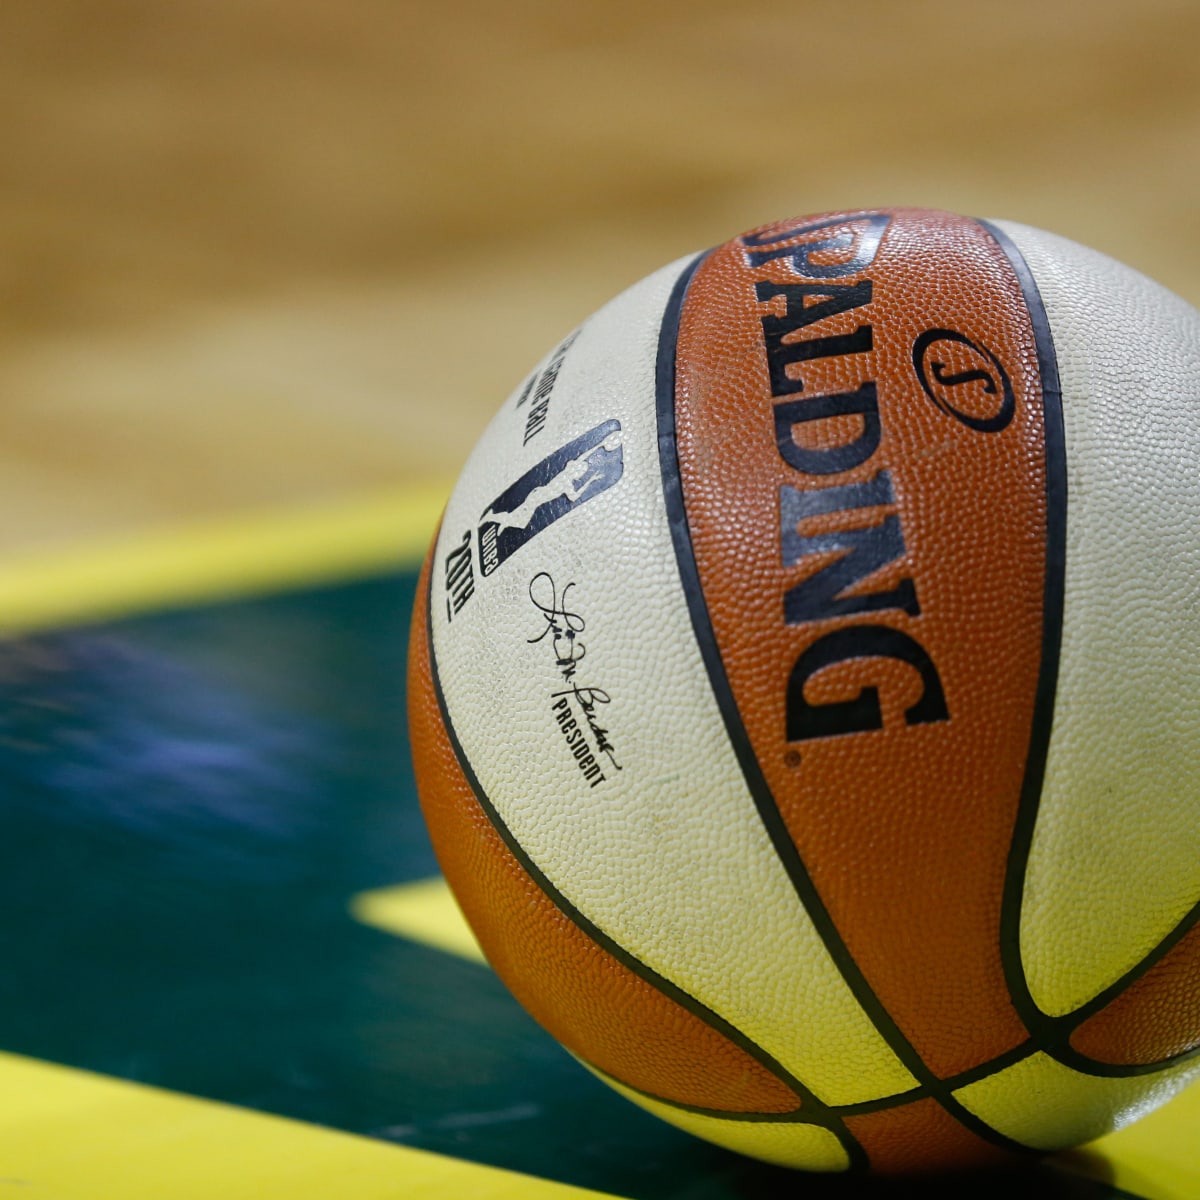 ESPN Expands WNBA TV Schedule To Include 13 More Games